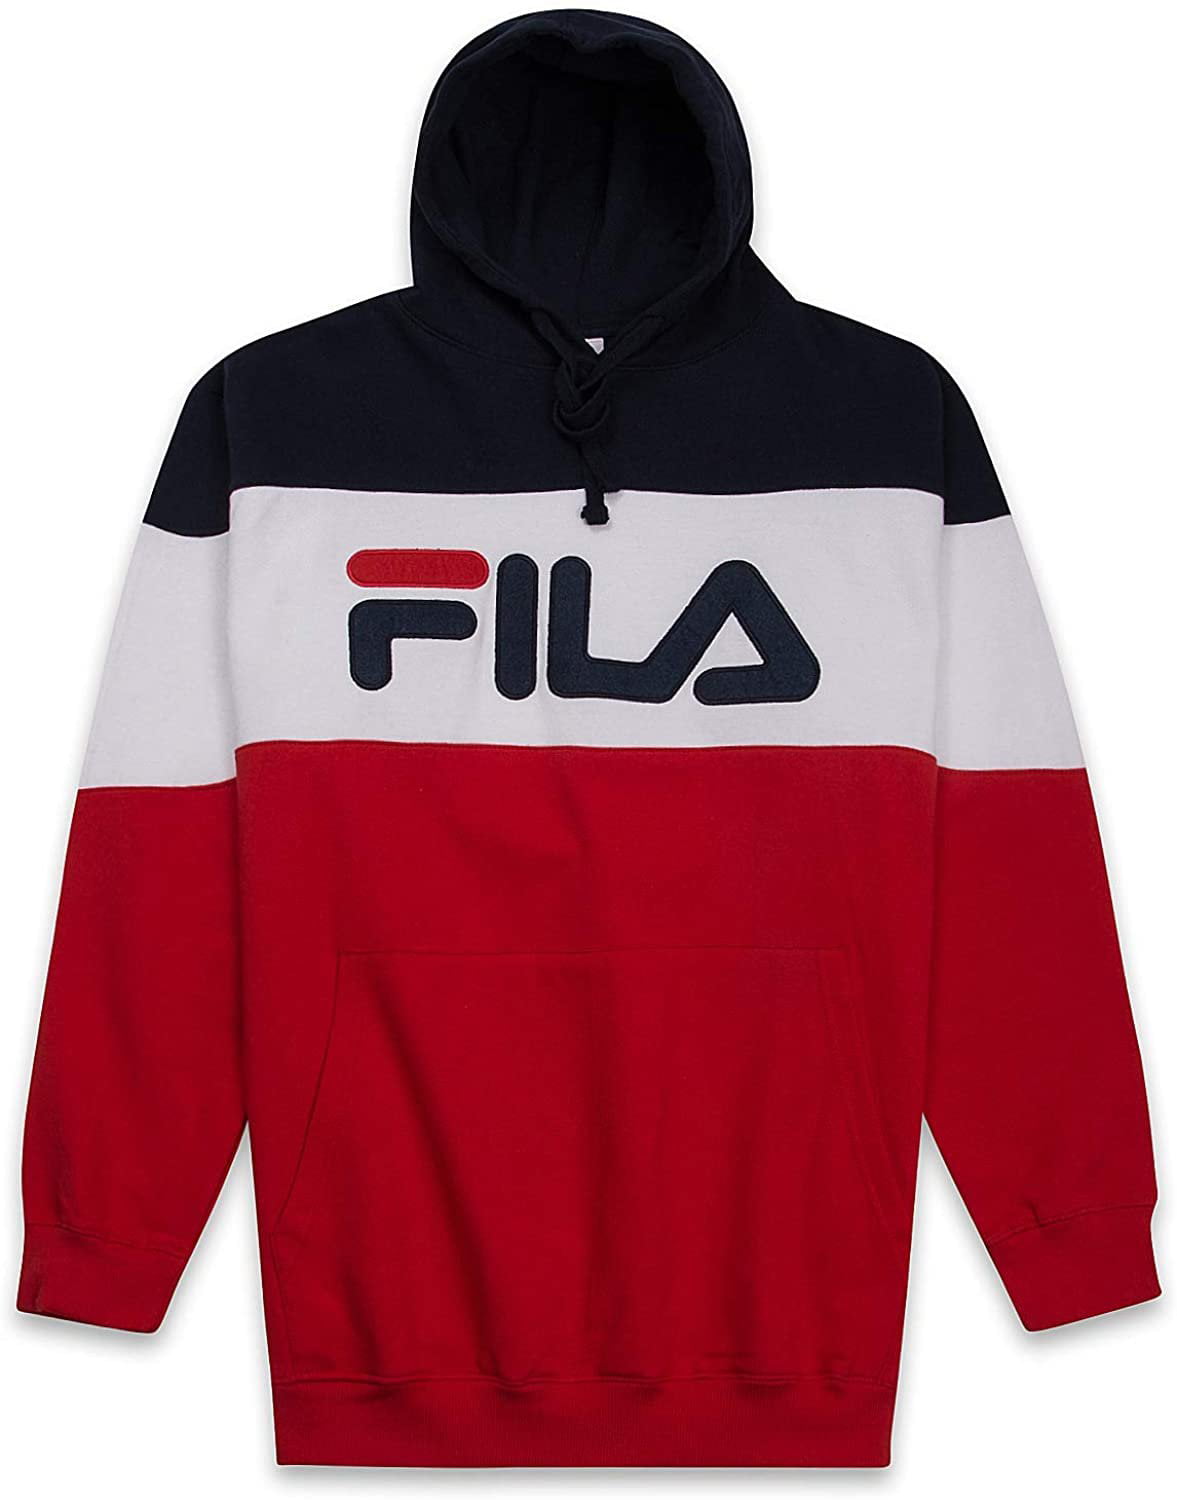 Fila Big Tall Colorblock Pullover Hoodie Navy Red White XLT Walmart.com